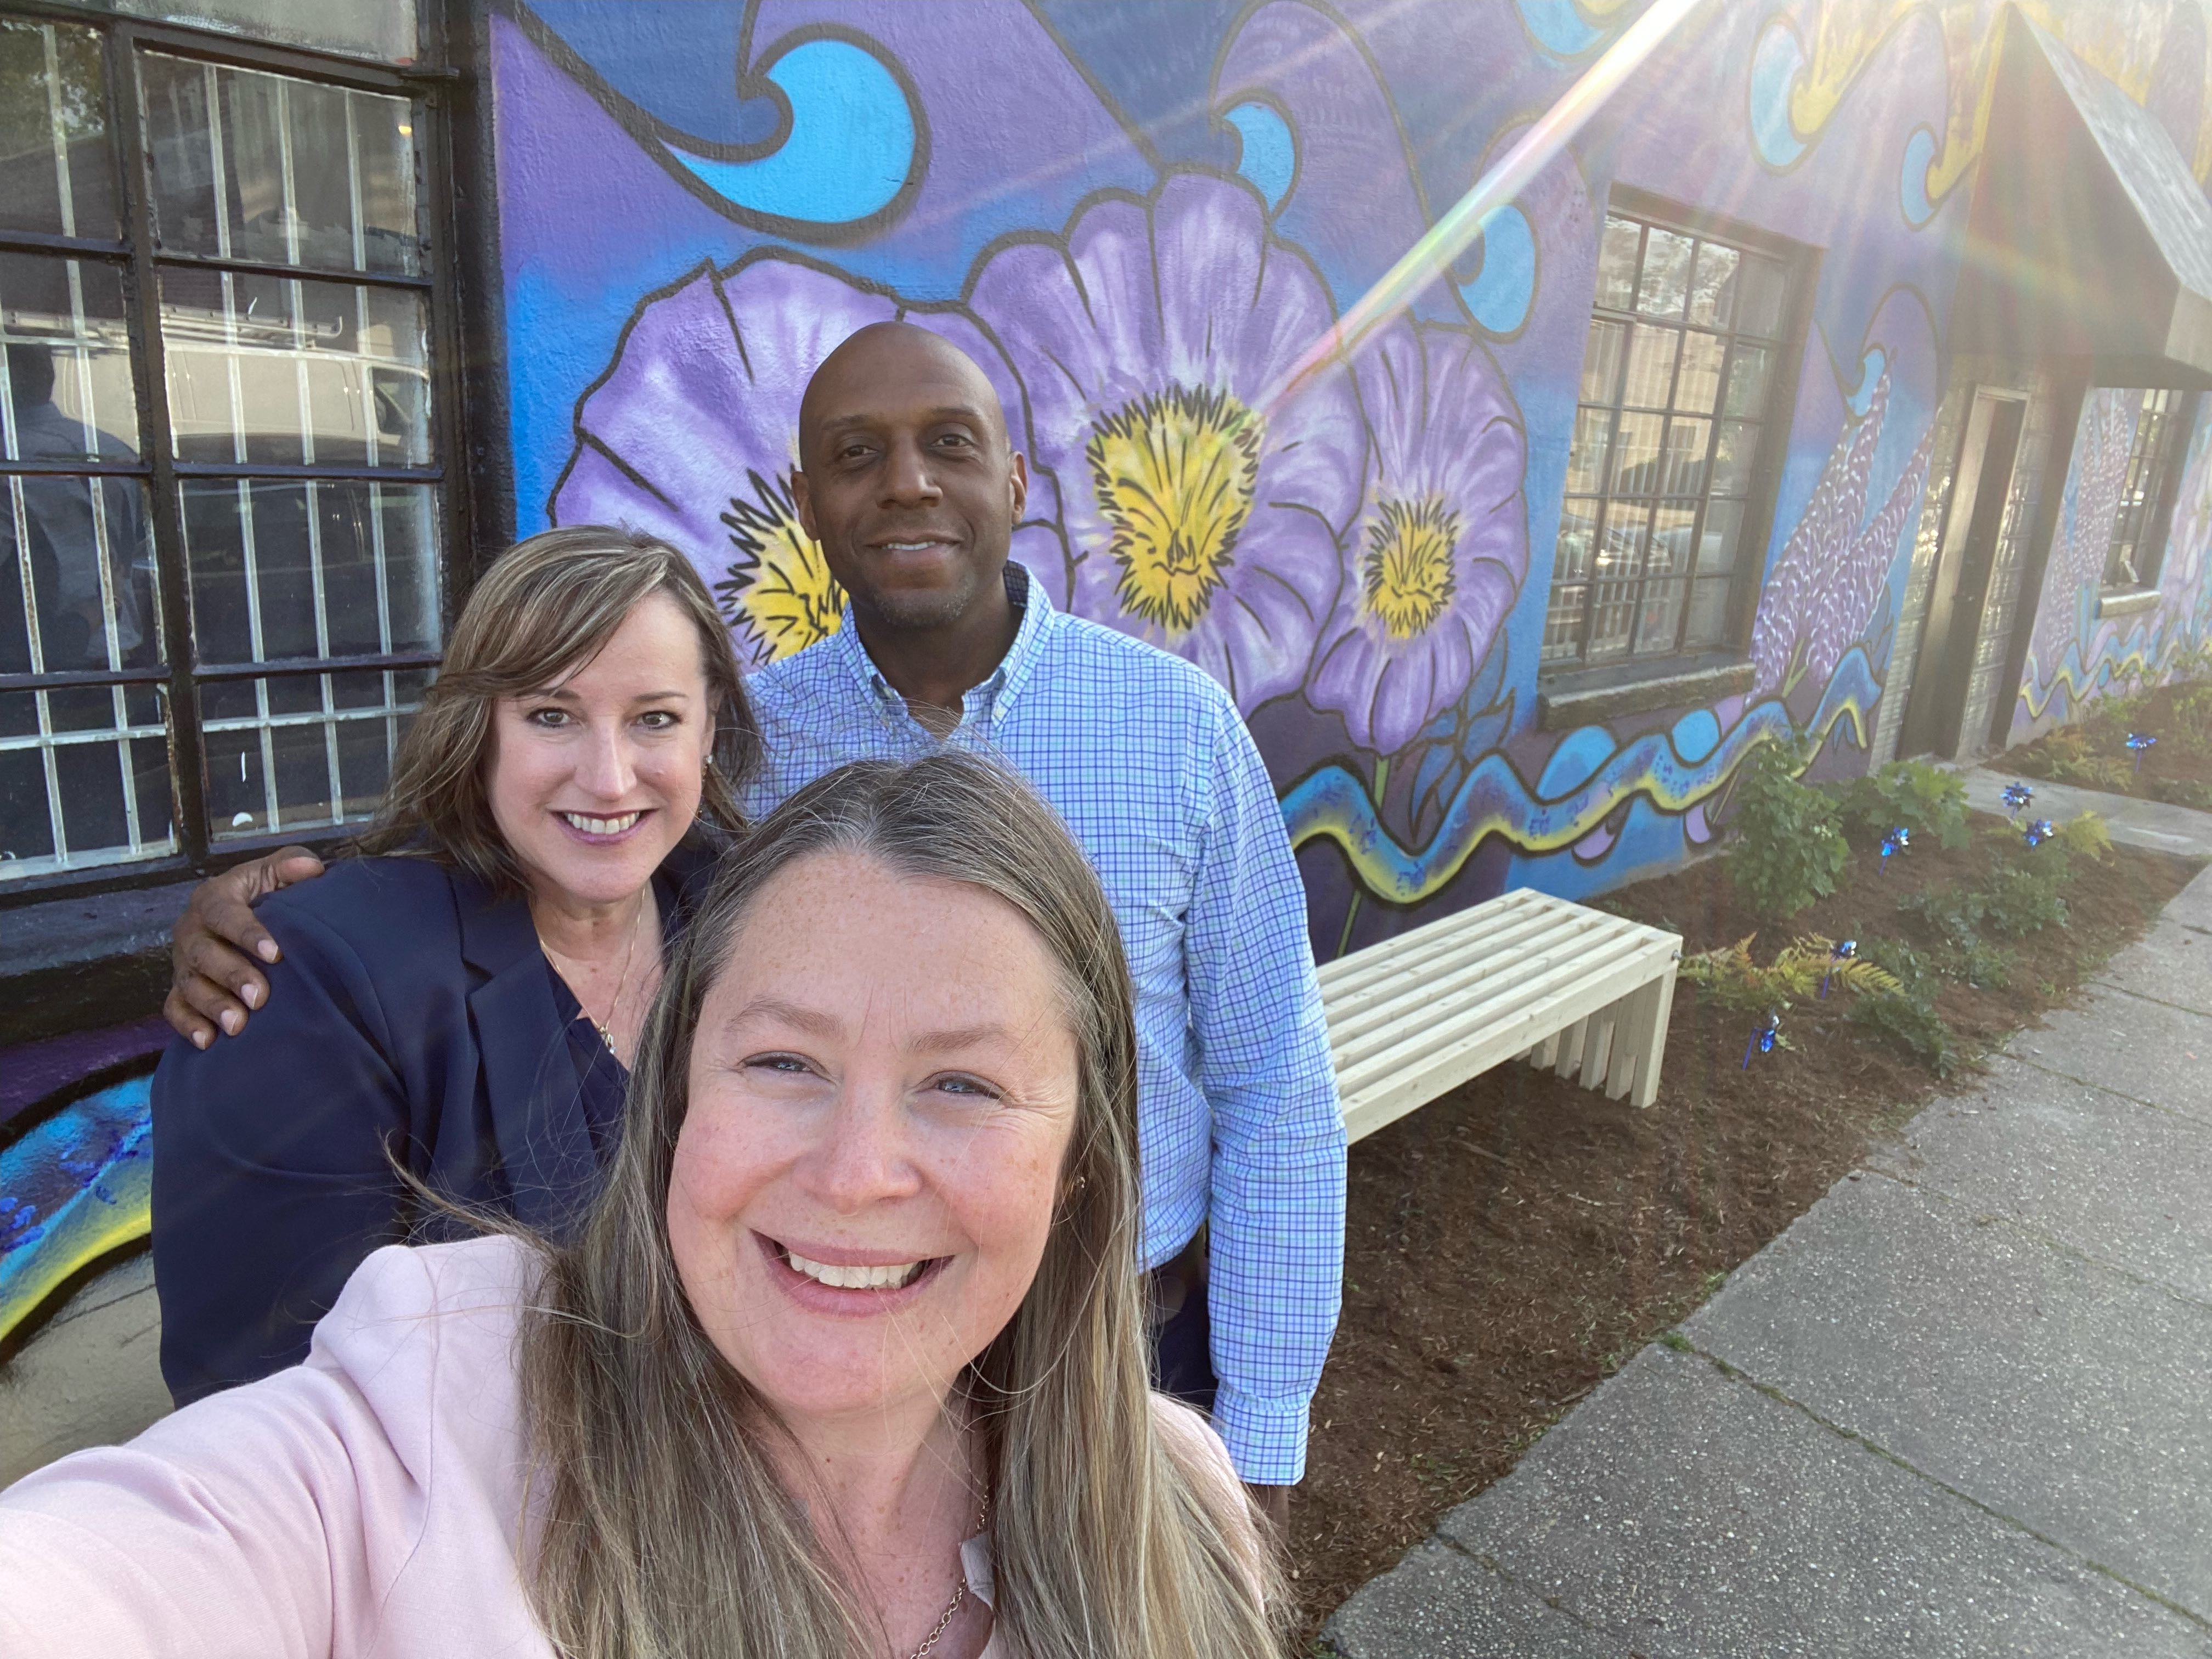 Drucker + Falk has a long history of partnering with Samaritan House, including support for previous murals rallying around domestic violence awareness.